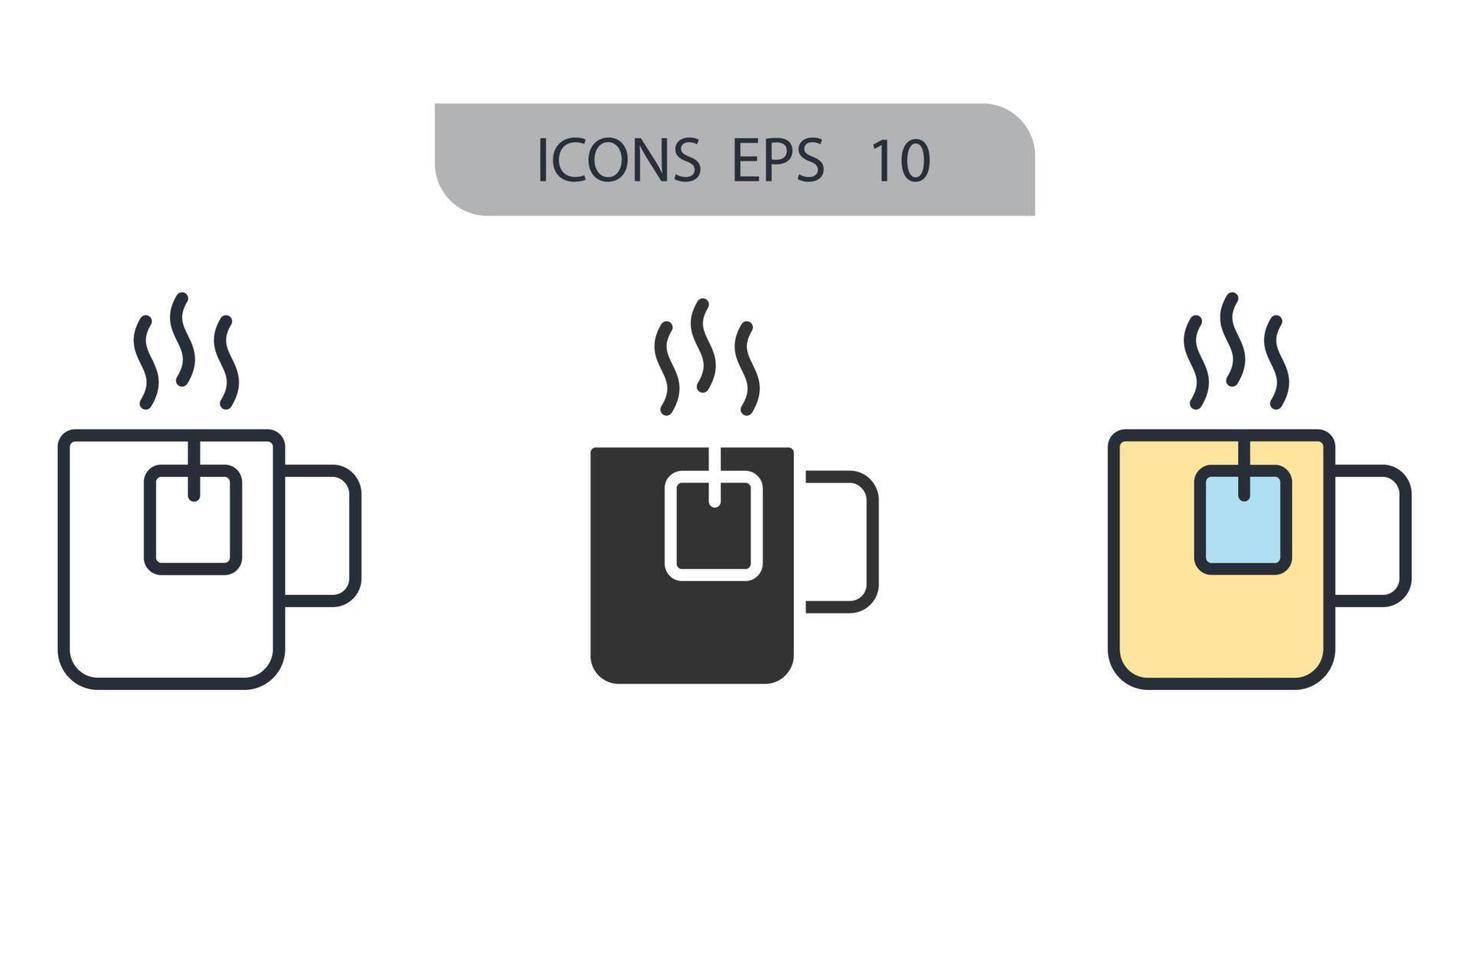 breakfast icons  symbol vector elements for infographic web